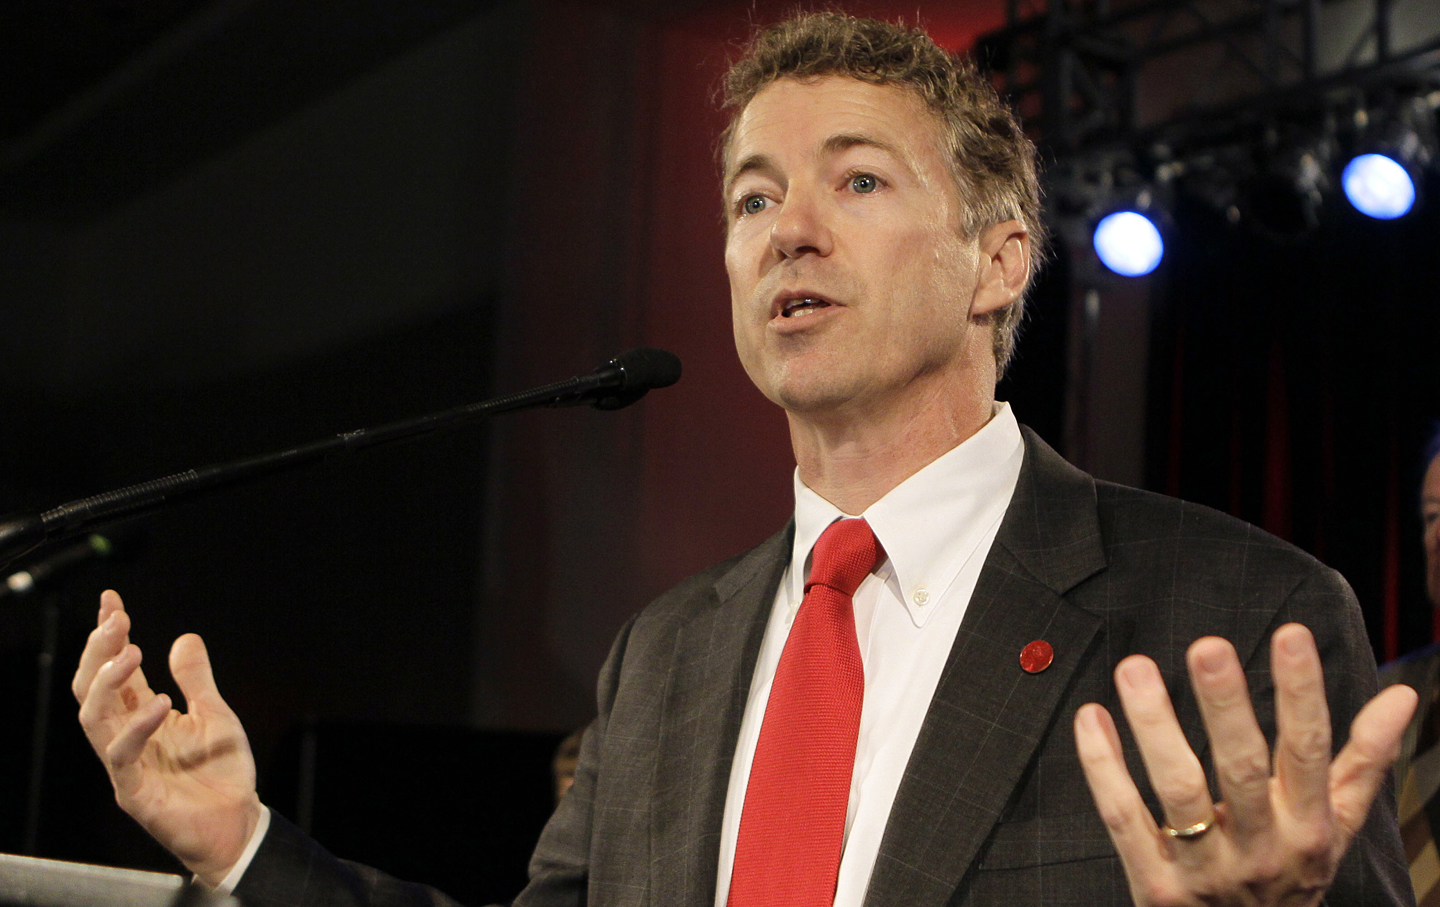 Rand Paul addresses supporters in Bowling Green, Kentucky.